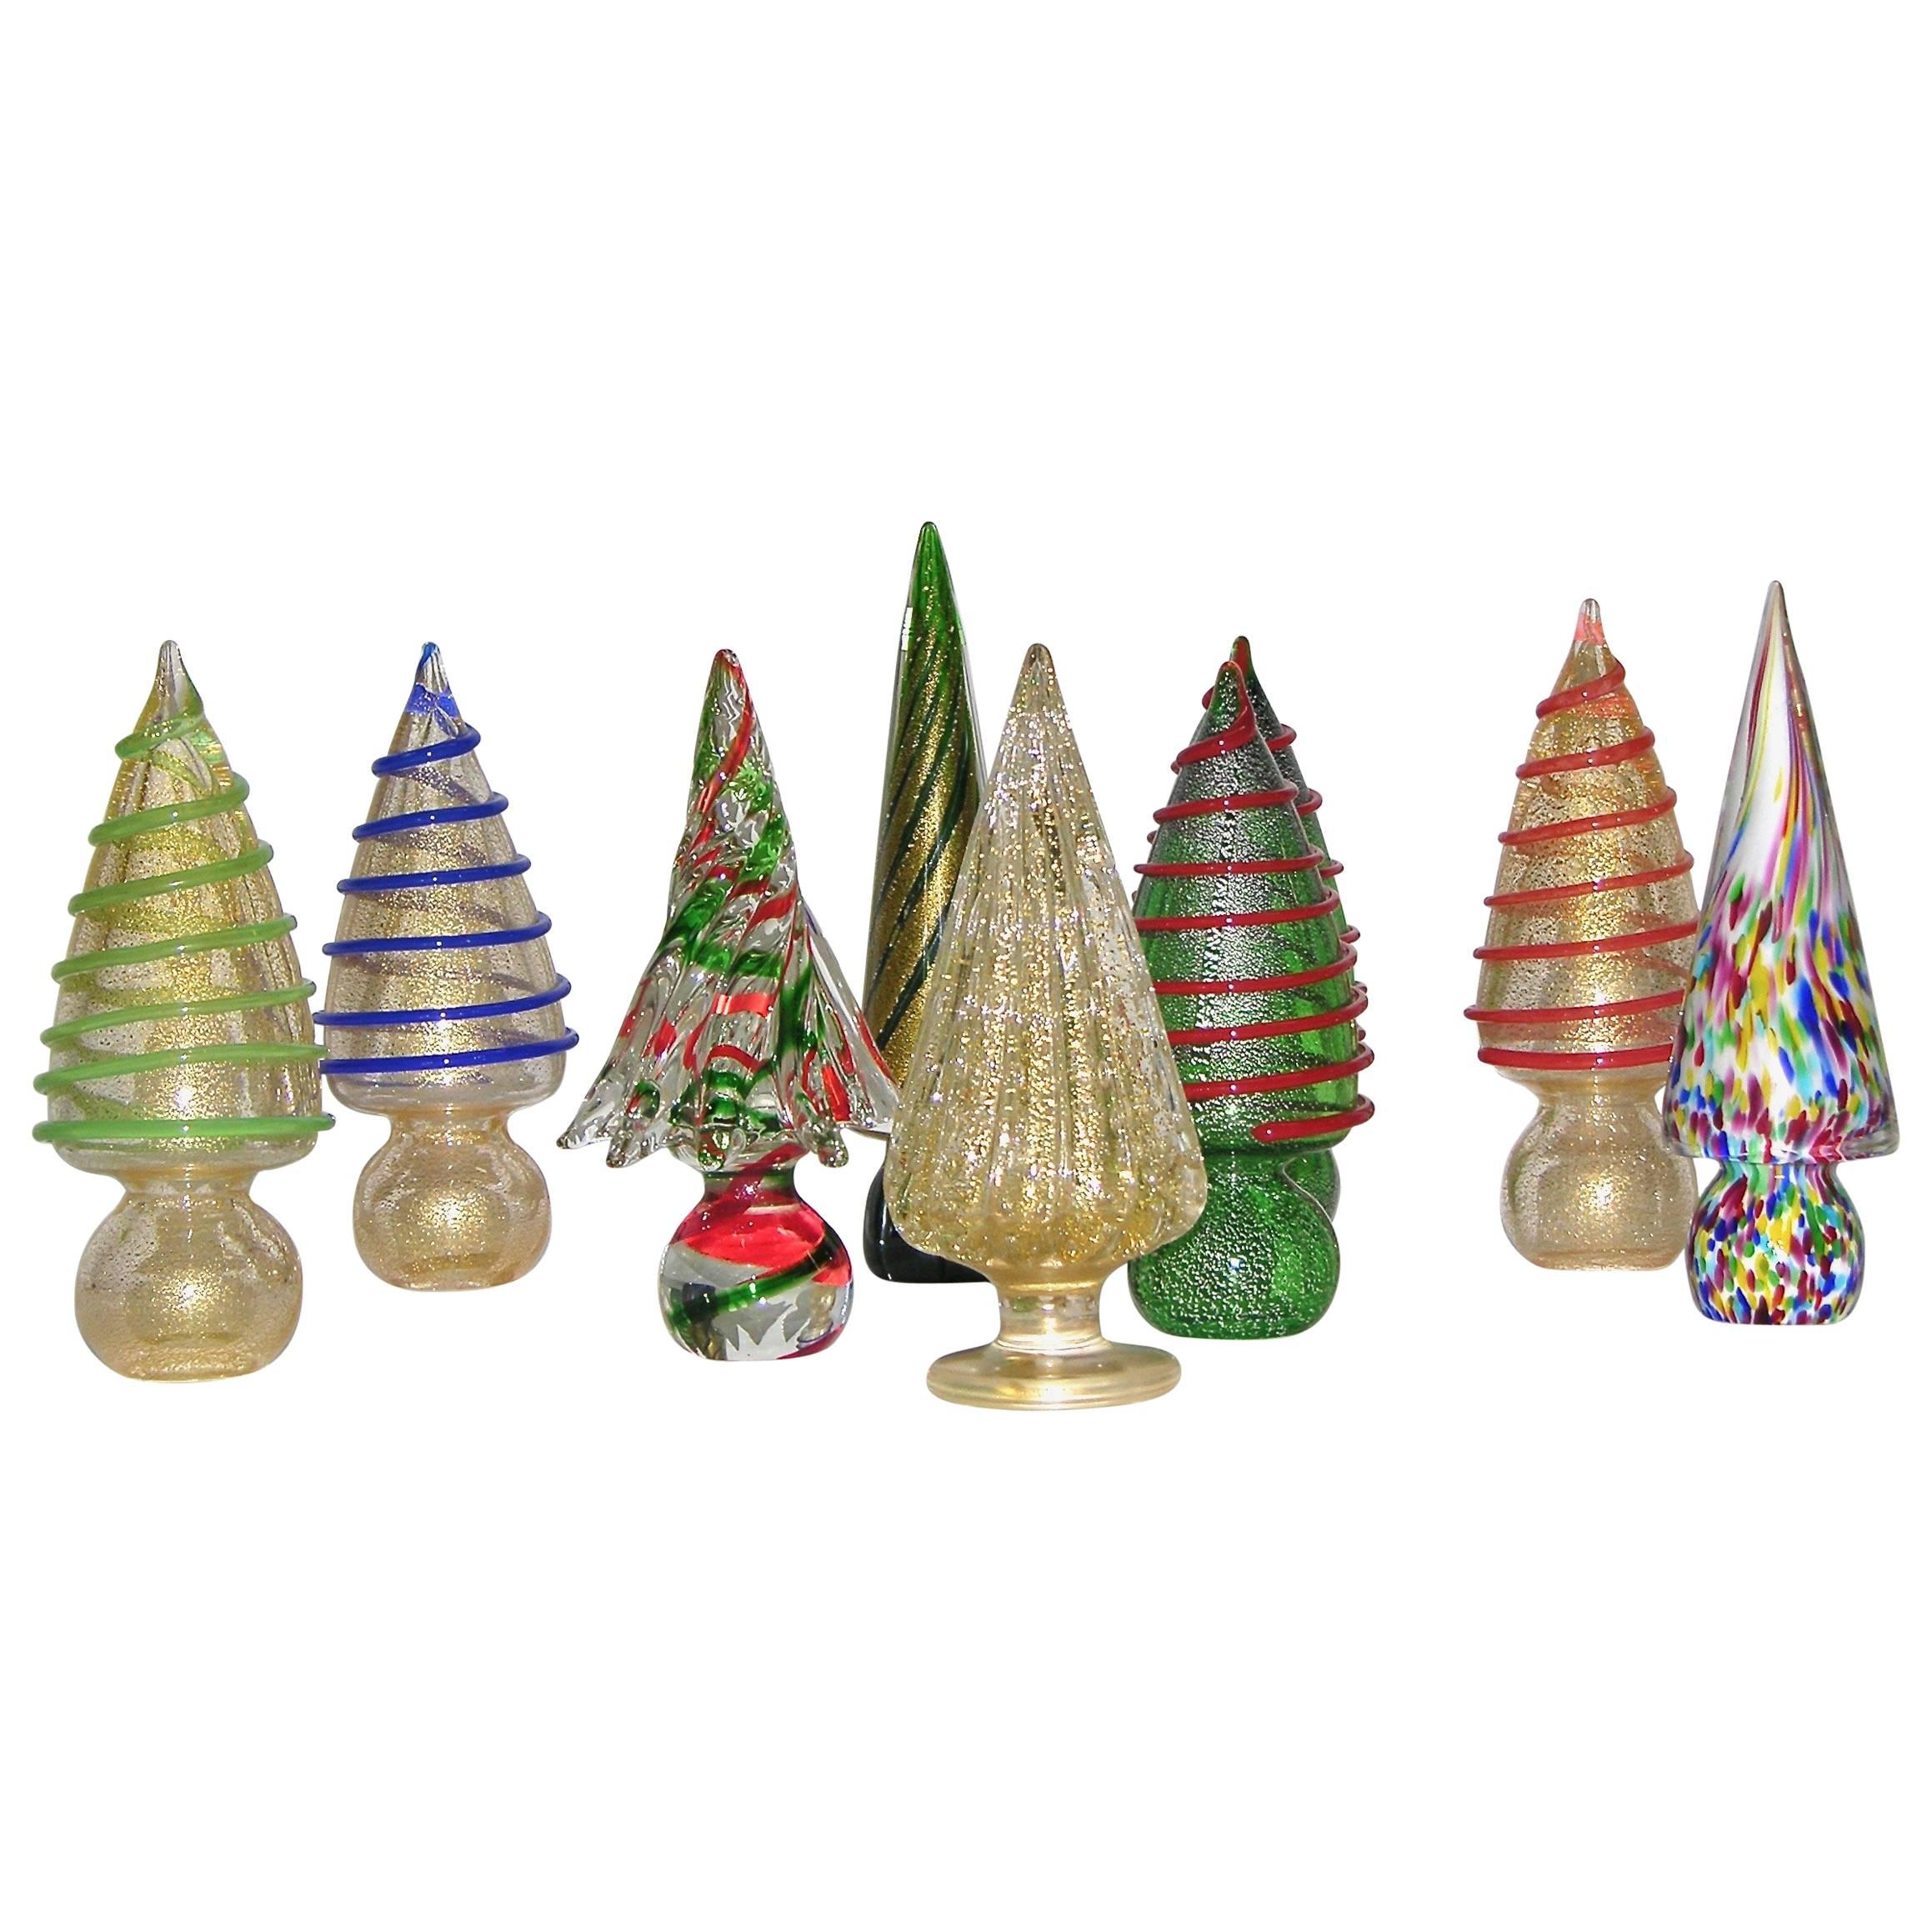 1980s Italian Vintage Colorful Murano Glass Christmas Trees Sculptures by Formia